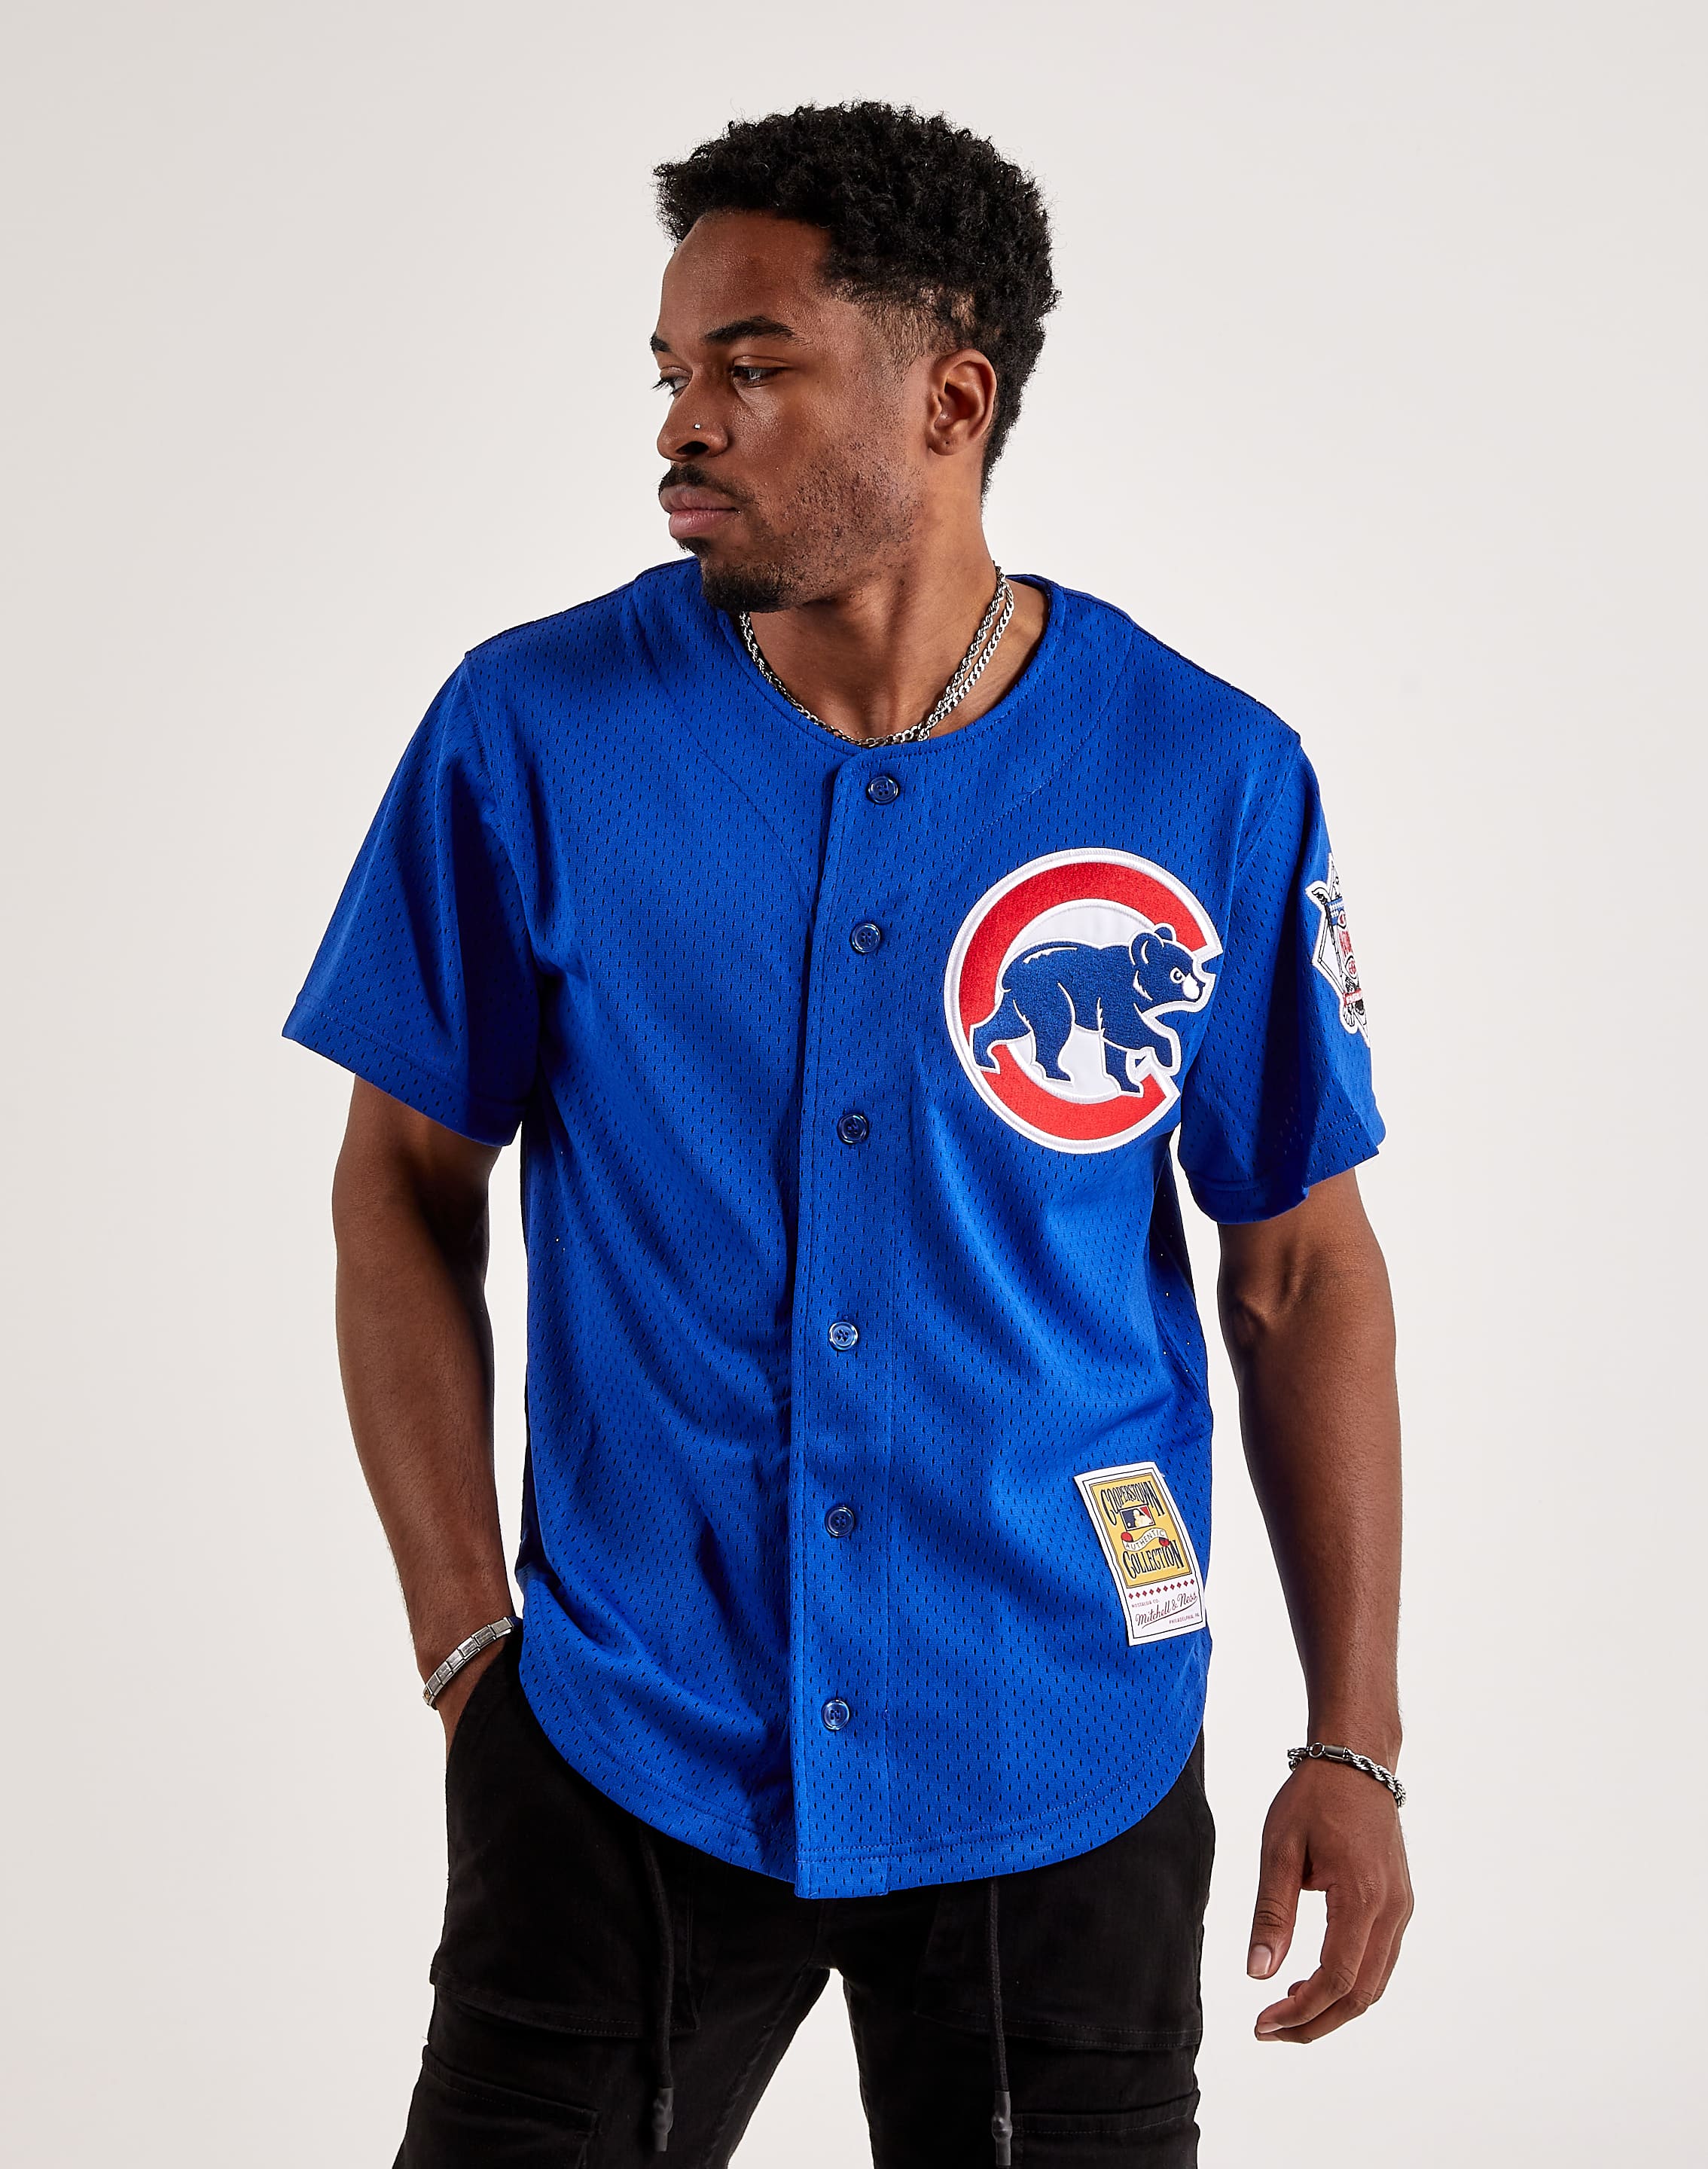 Authentic Cubs jersey